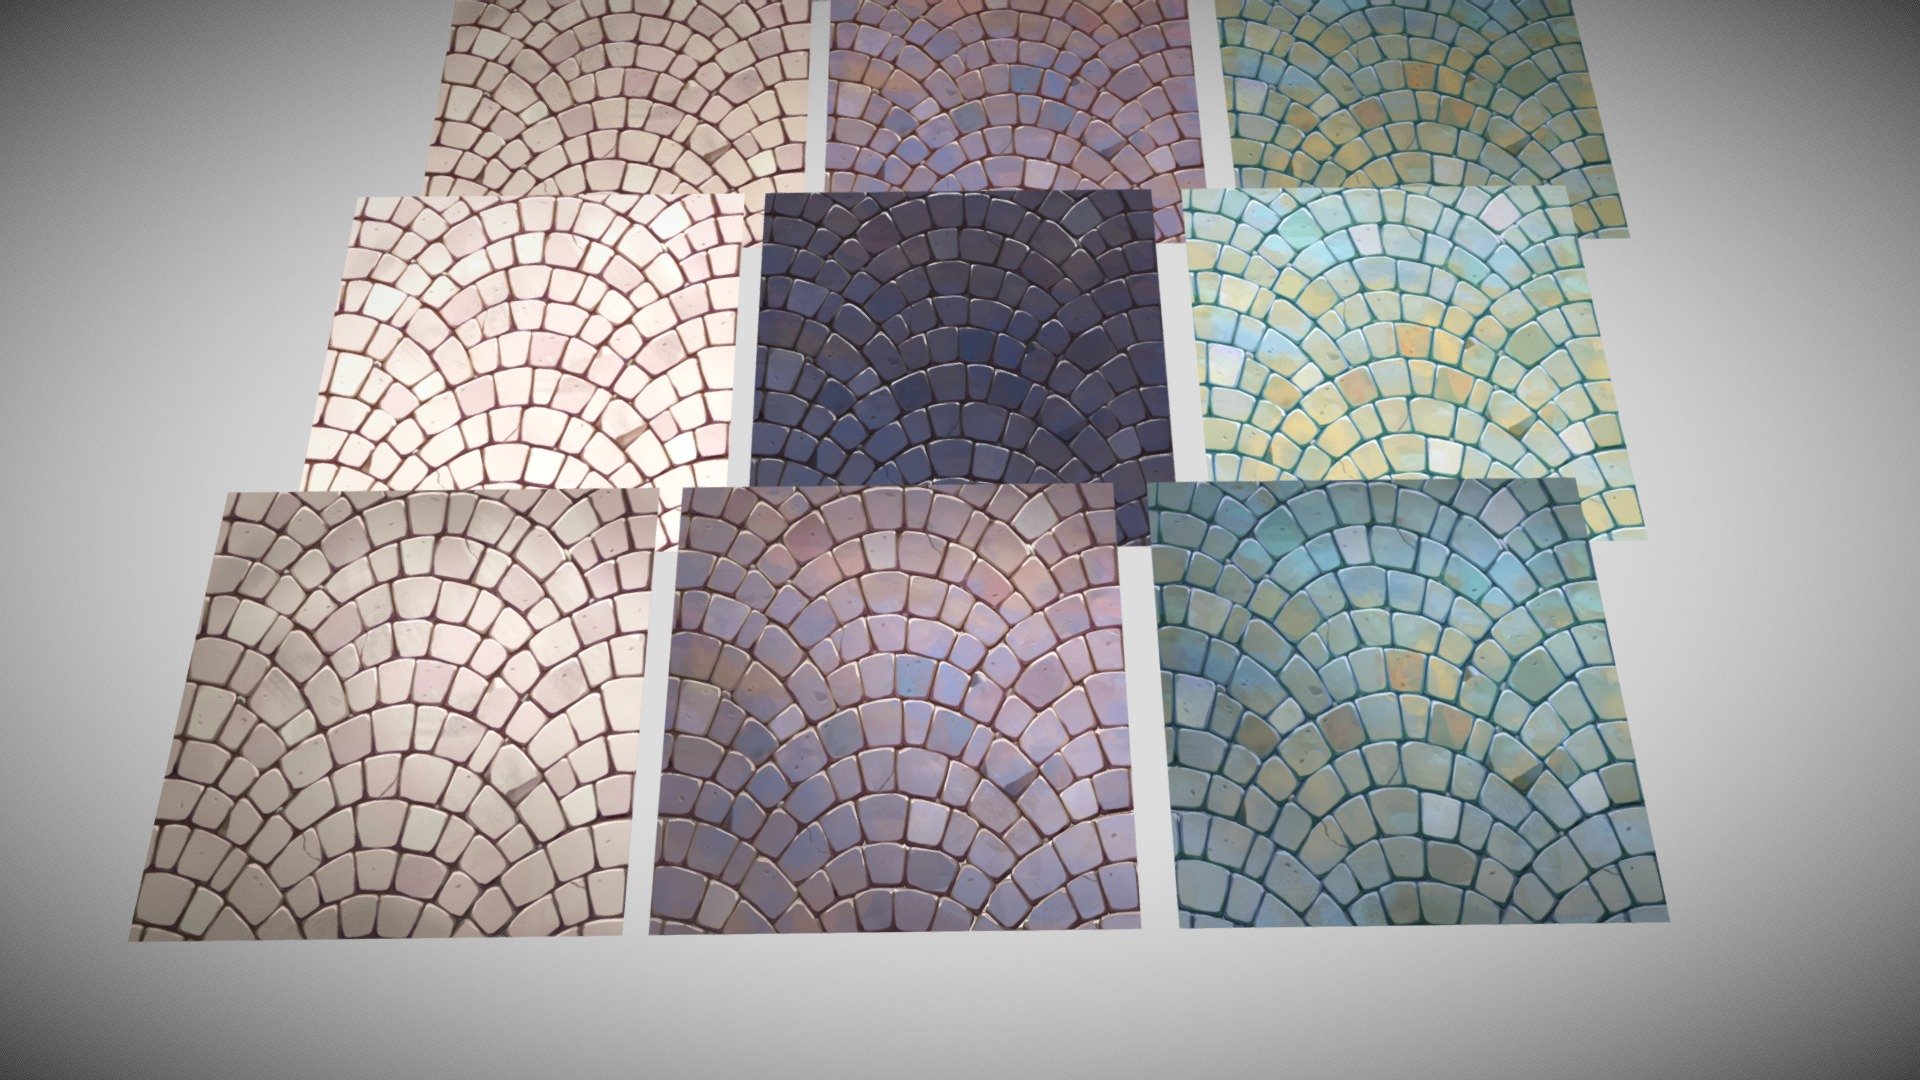 Handpainted Floor Tiles Textures
In this pack you will find all the essentials to make a beautiful floor tiles and more!

The pack contains :

3 Medieval ark tiled textures with différents colors in 2048x2048 + NORMAL MAP + AO MAP with 4 variation of light - Handpainted Floor Tiles Textures - Buy Royalty Free 3D model by Chromisu 3d model